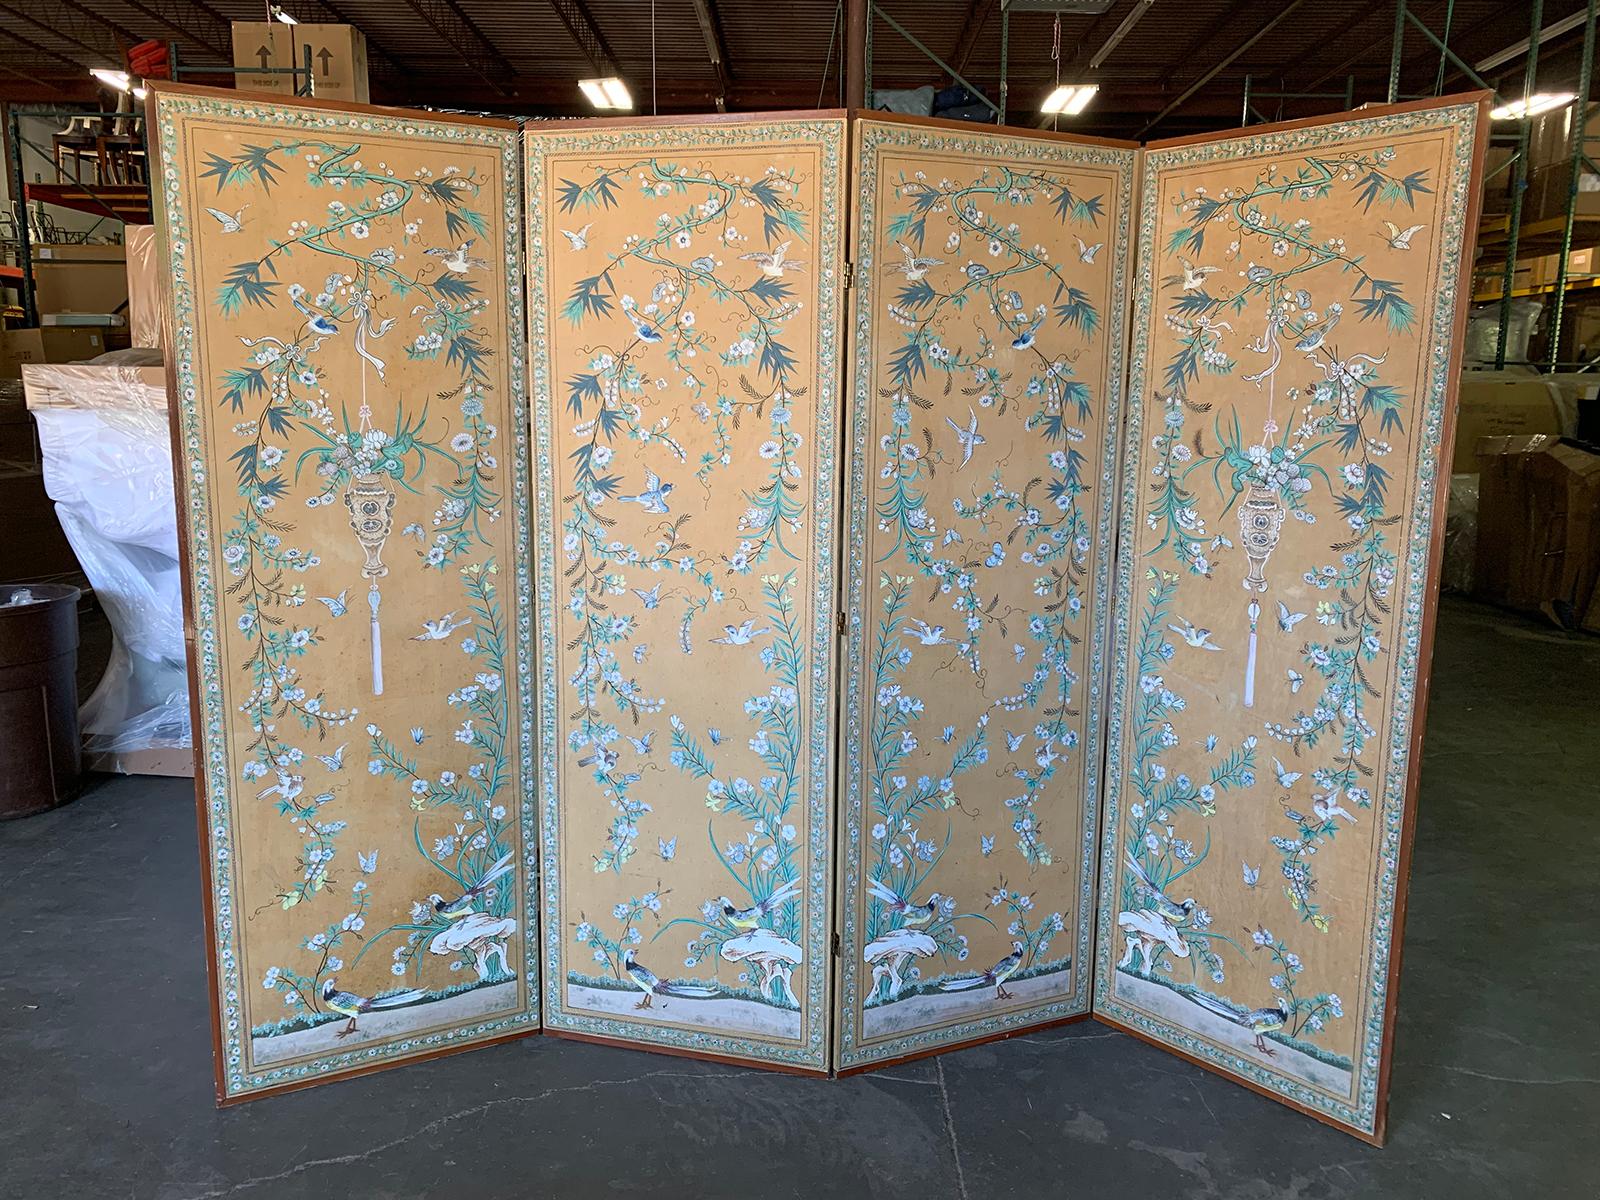 20th century Chinese chinoiserie four-panel paper screen.
Overall dimensions: 102